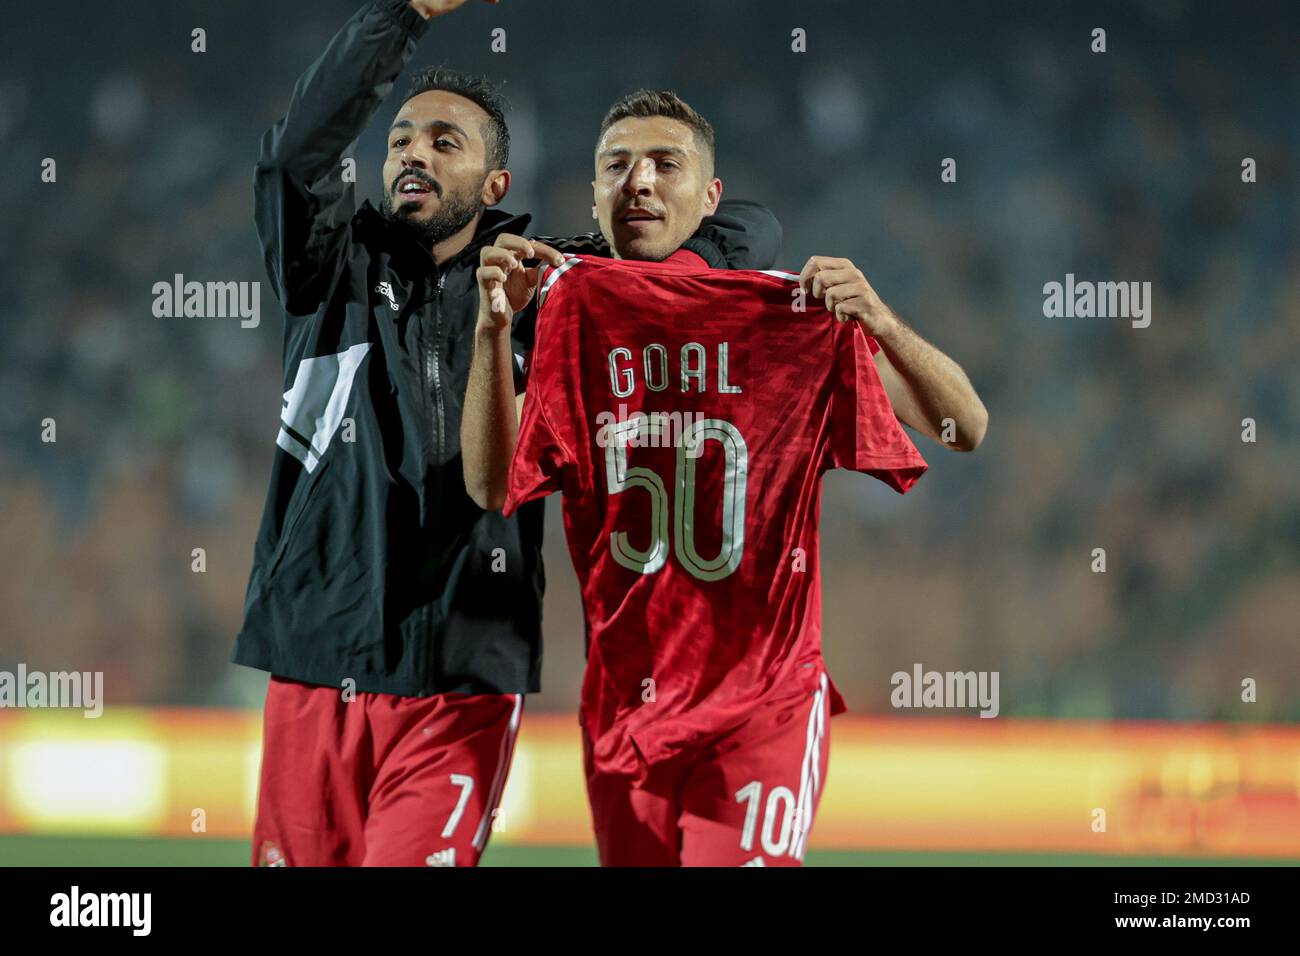 CAIRO, EGYPT - 21 JANUARY: Mohamed Sherif of Al Ahly celebrates after scoring goal during the Egyptian Premier League match between Zamalek SC and Al Stock Photo